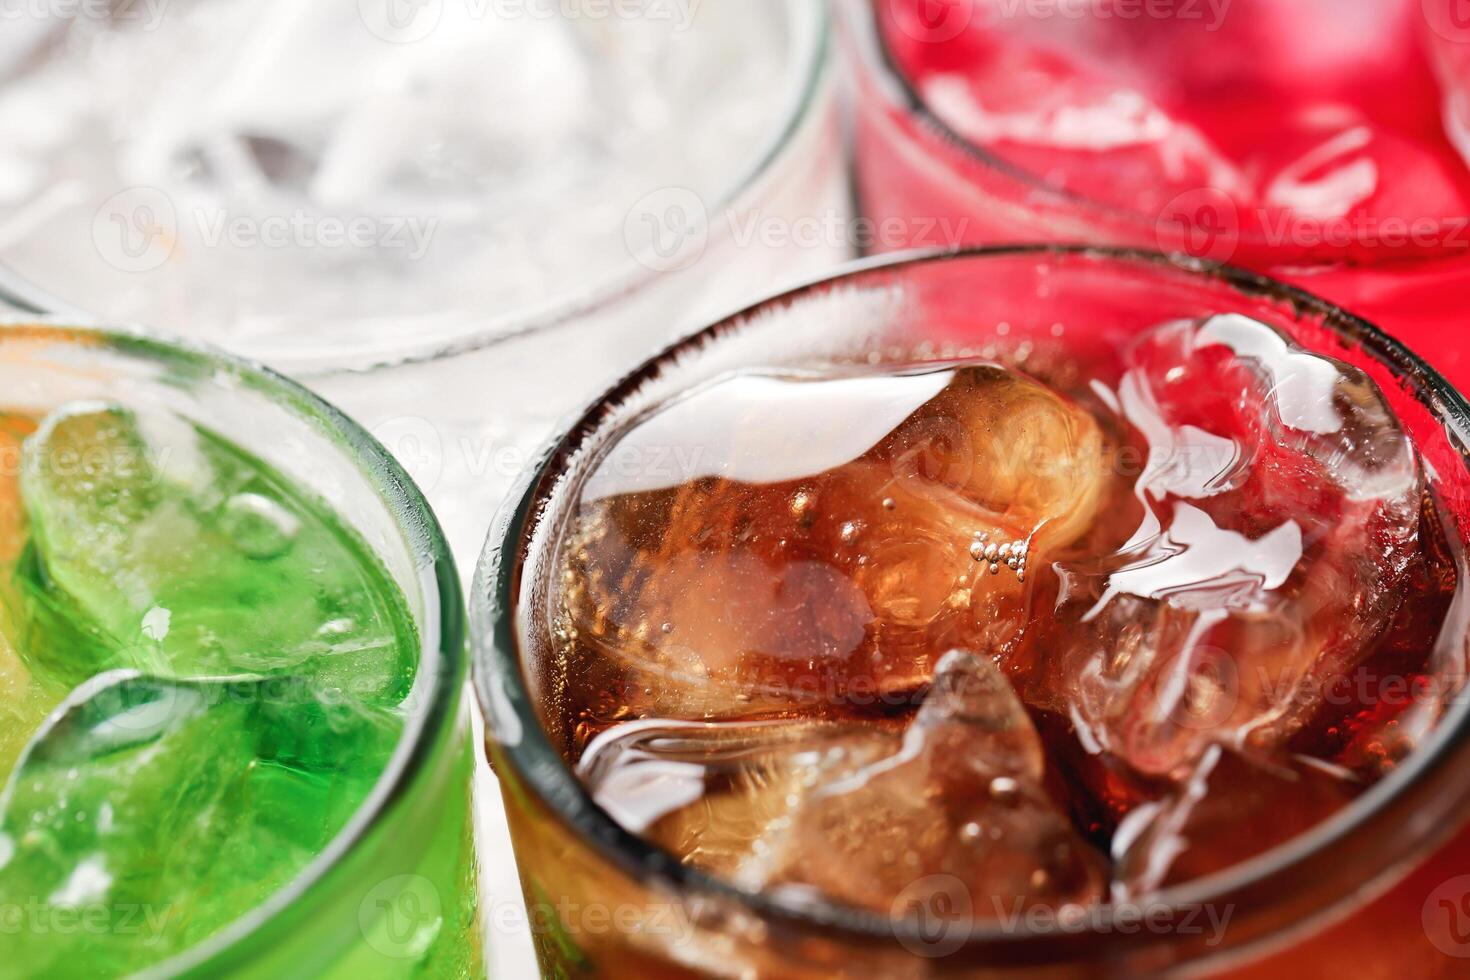 Soft drinks and fruit juice mixed with soda high in sugar have a negative effect on physical health photo